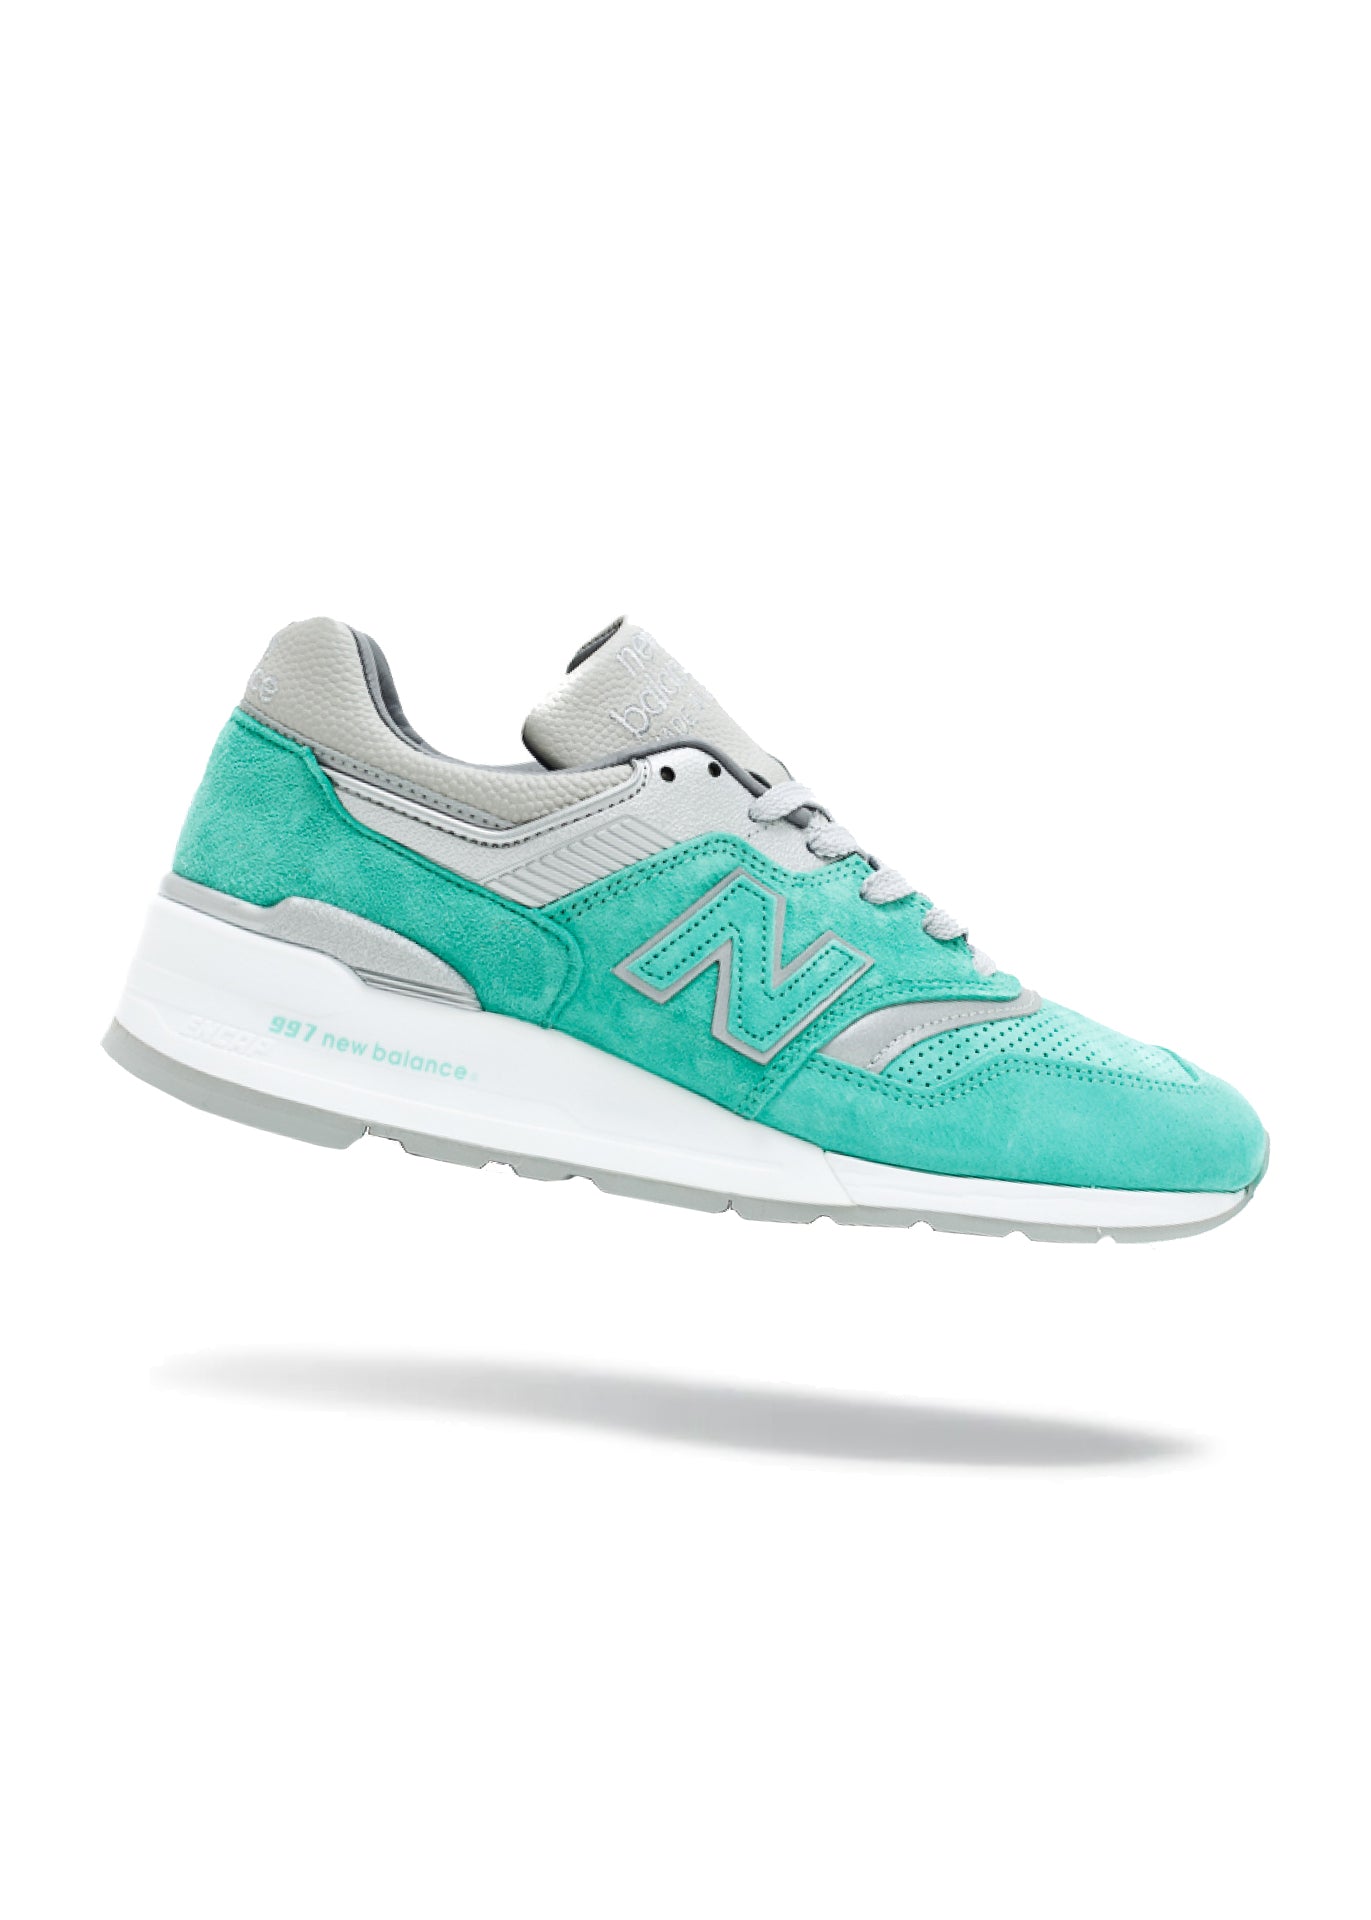 New Balance 997 CNCPTS Rivalry Pack New York